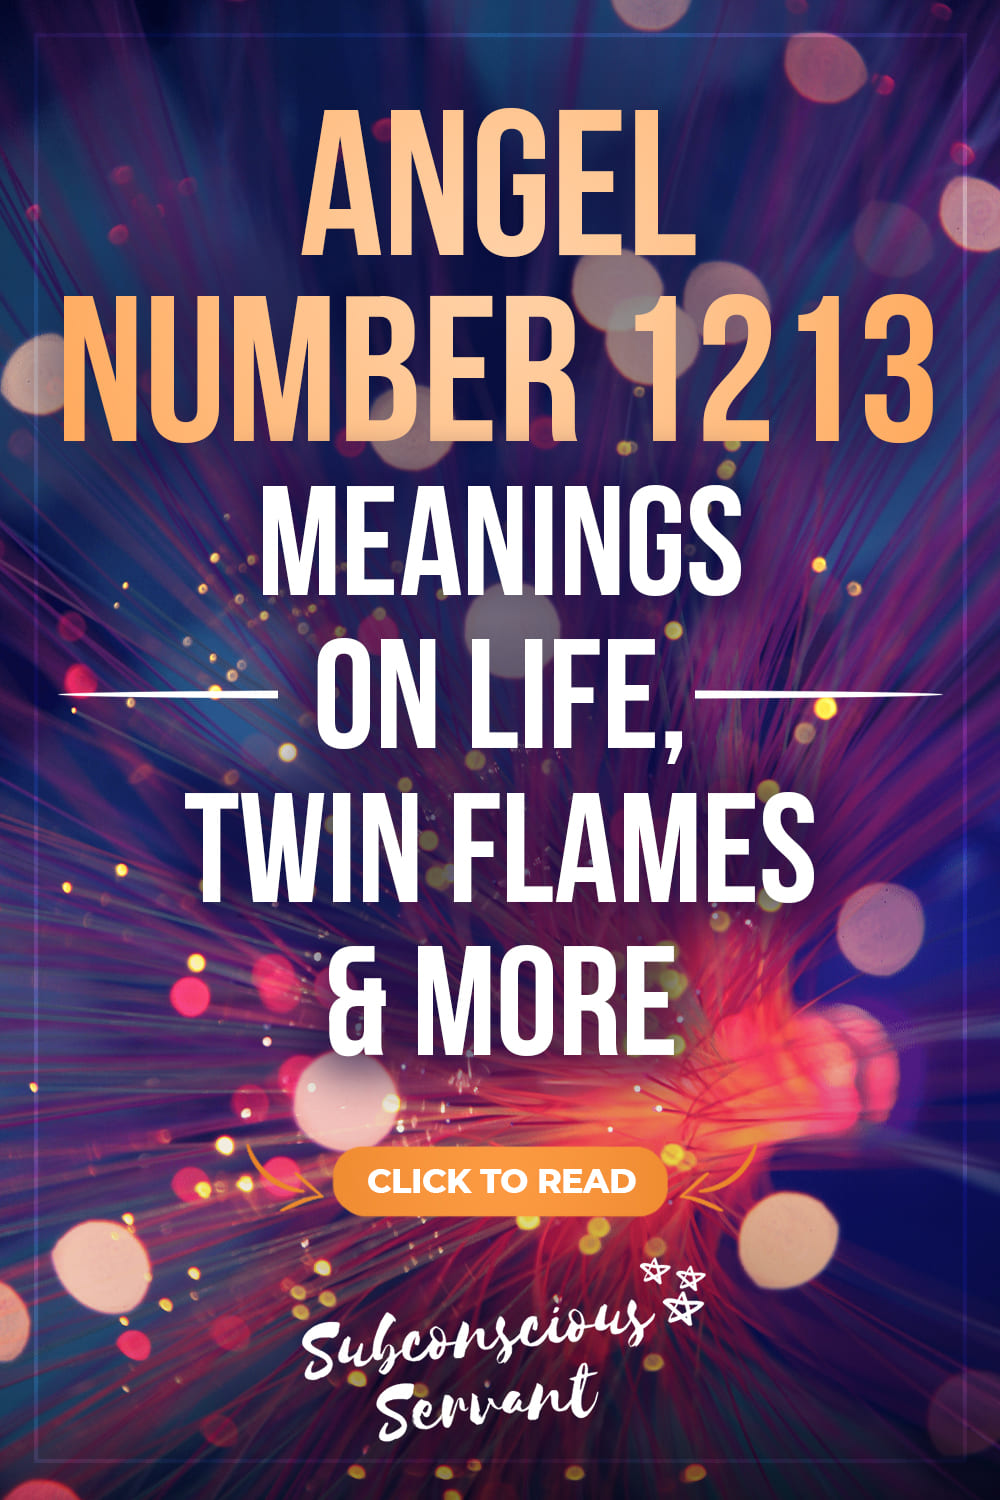 Angel Number 1213 Meanings on Life, Twin Flames & More